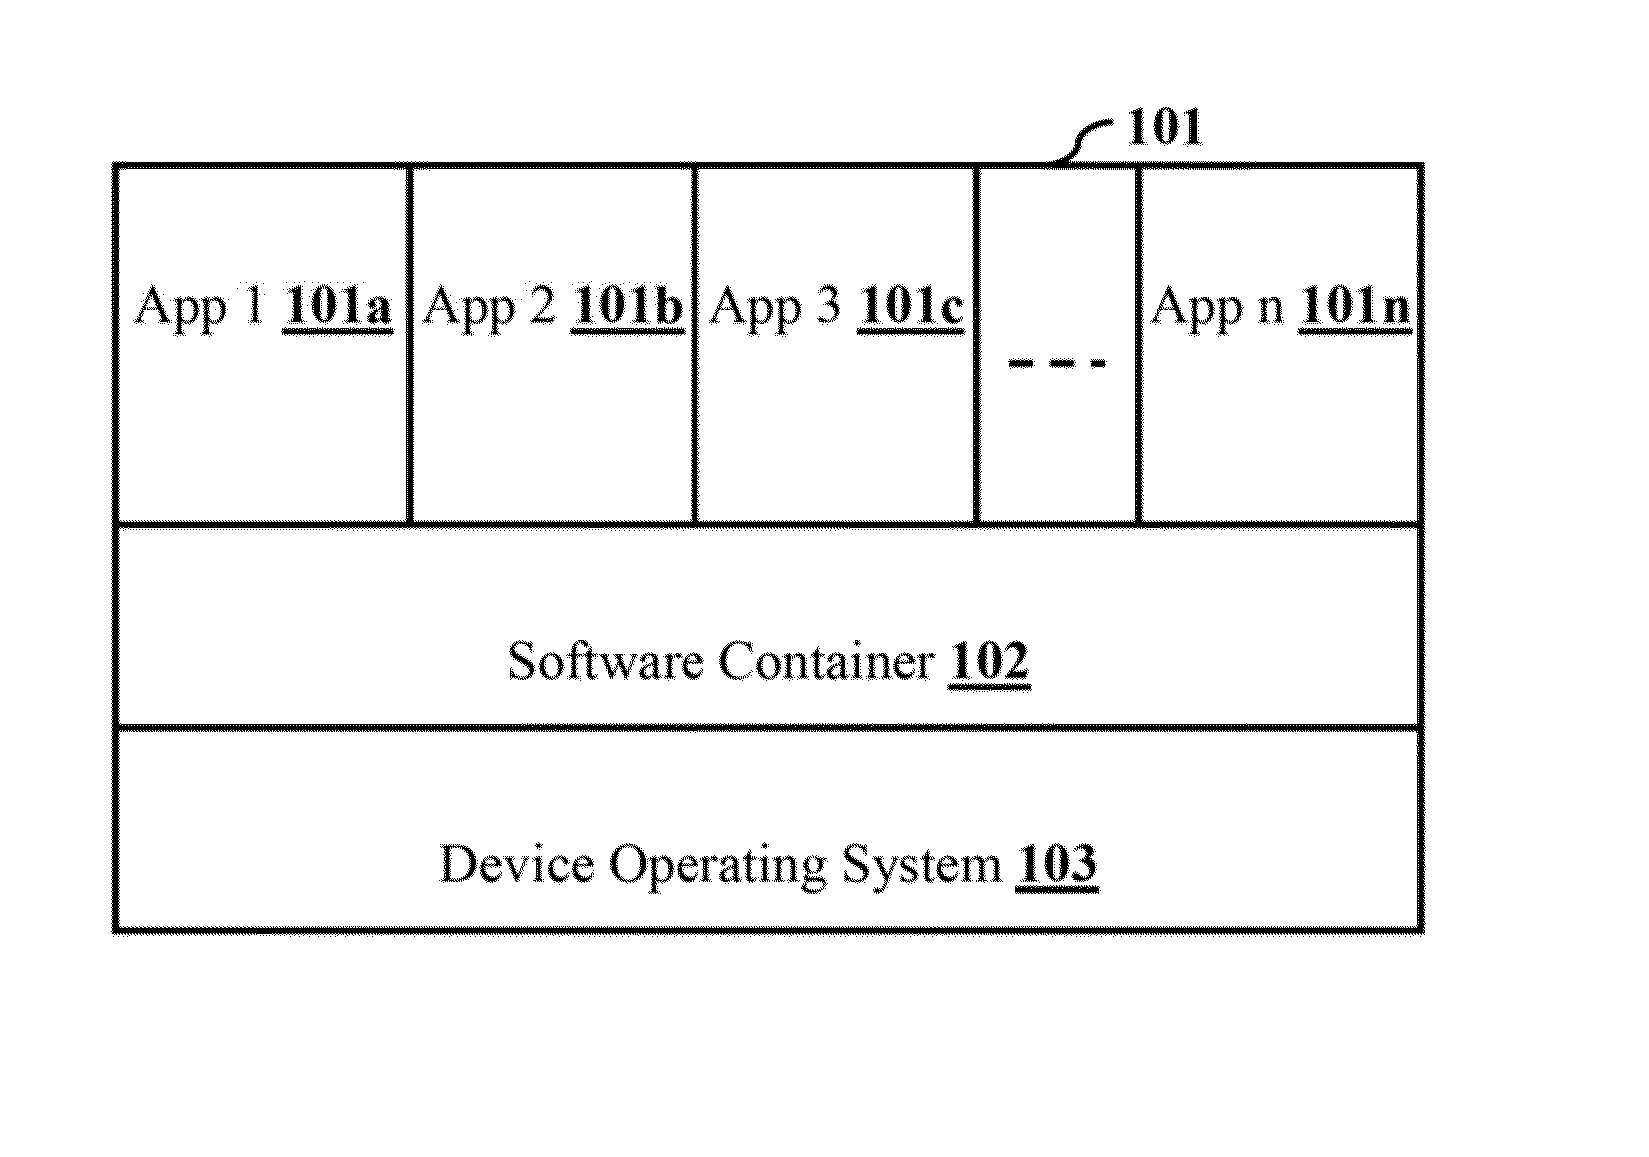 Method and system for hosting and running user configured dynamic applications through a software container on a computing device